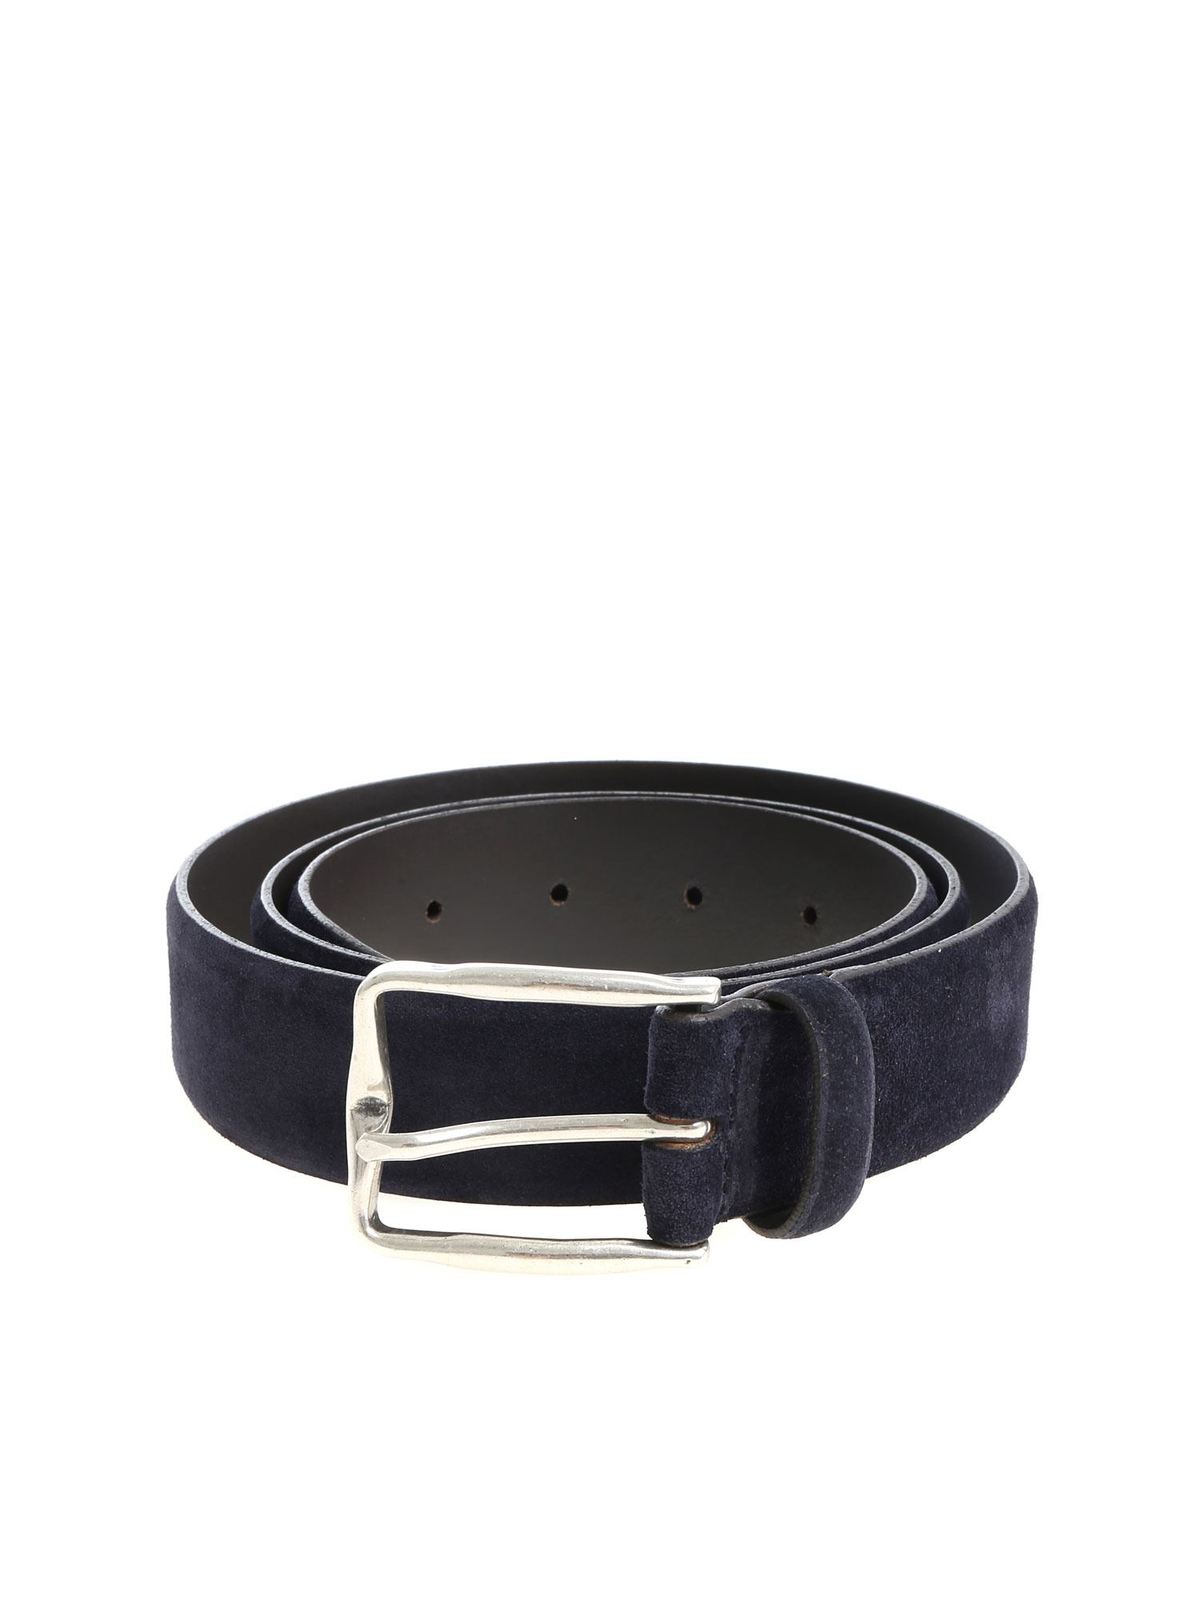 Andrea D'amico Blue Suede Belt